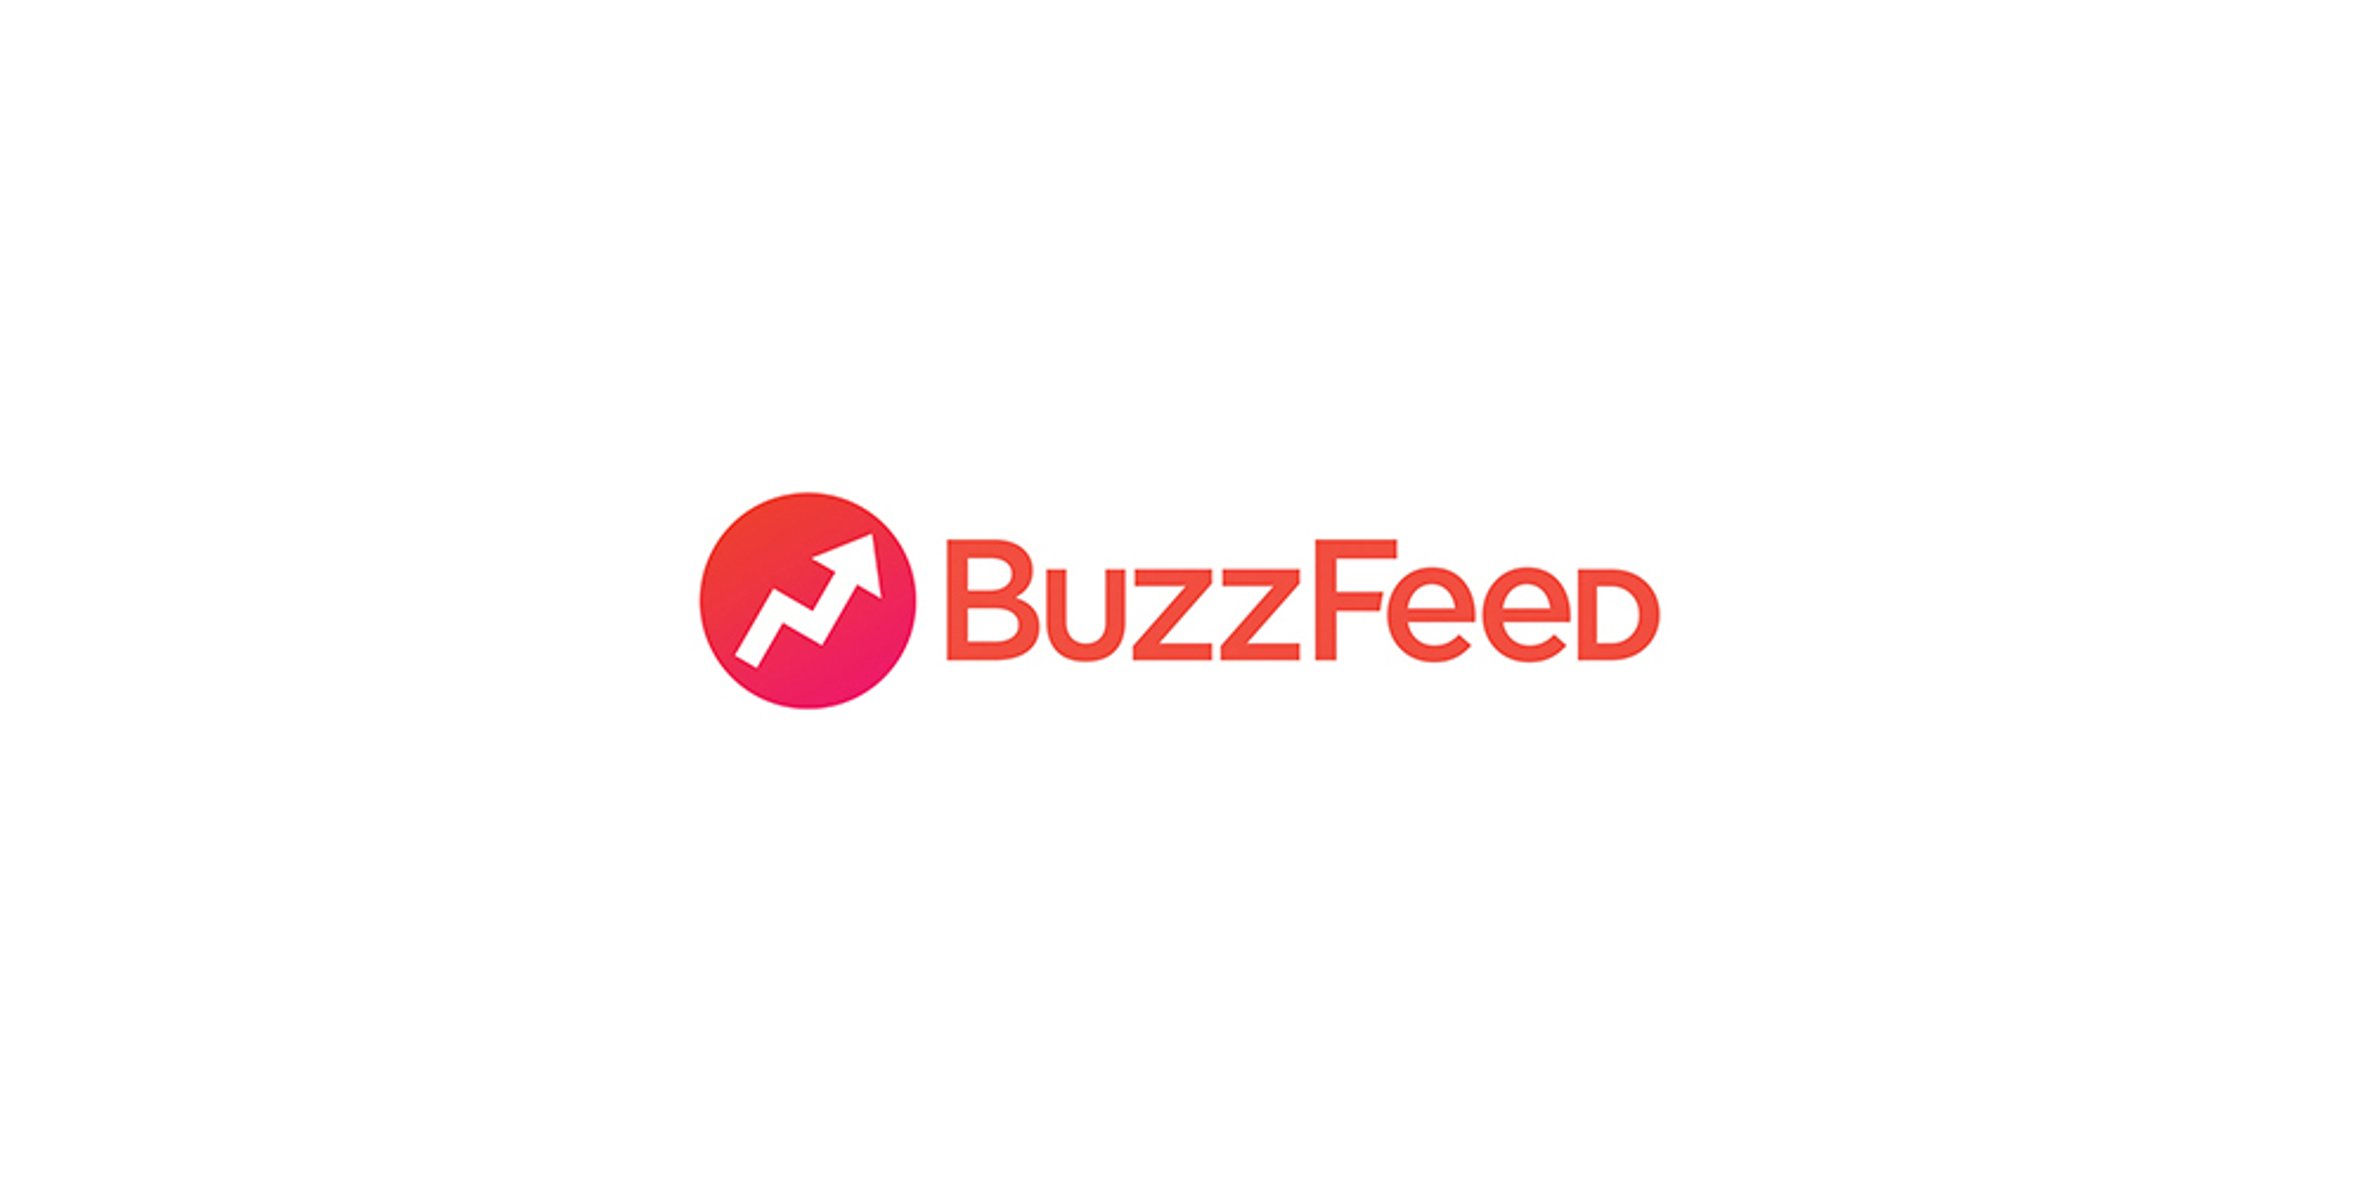 Casting Nail Artists in NYC For Buzz Feed!